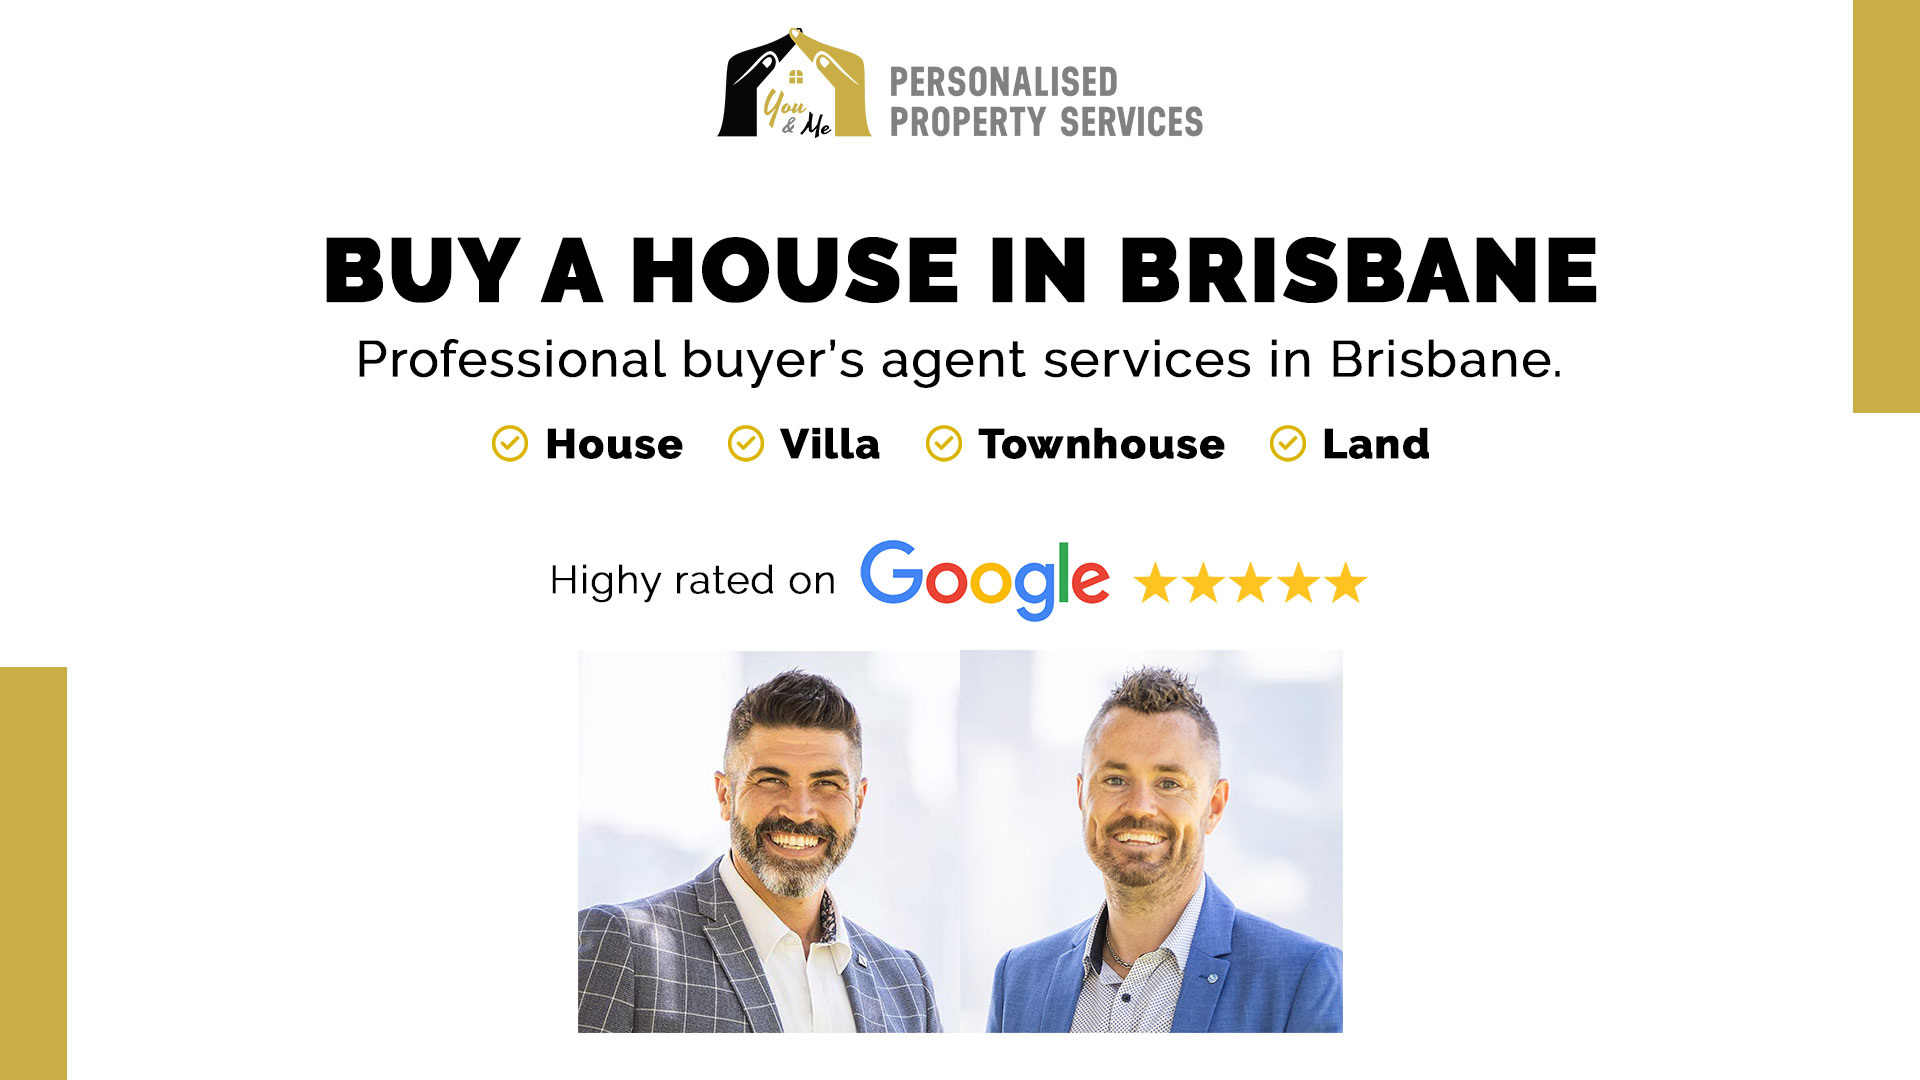 Buy a house in Brisbane with our buyers agents